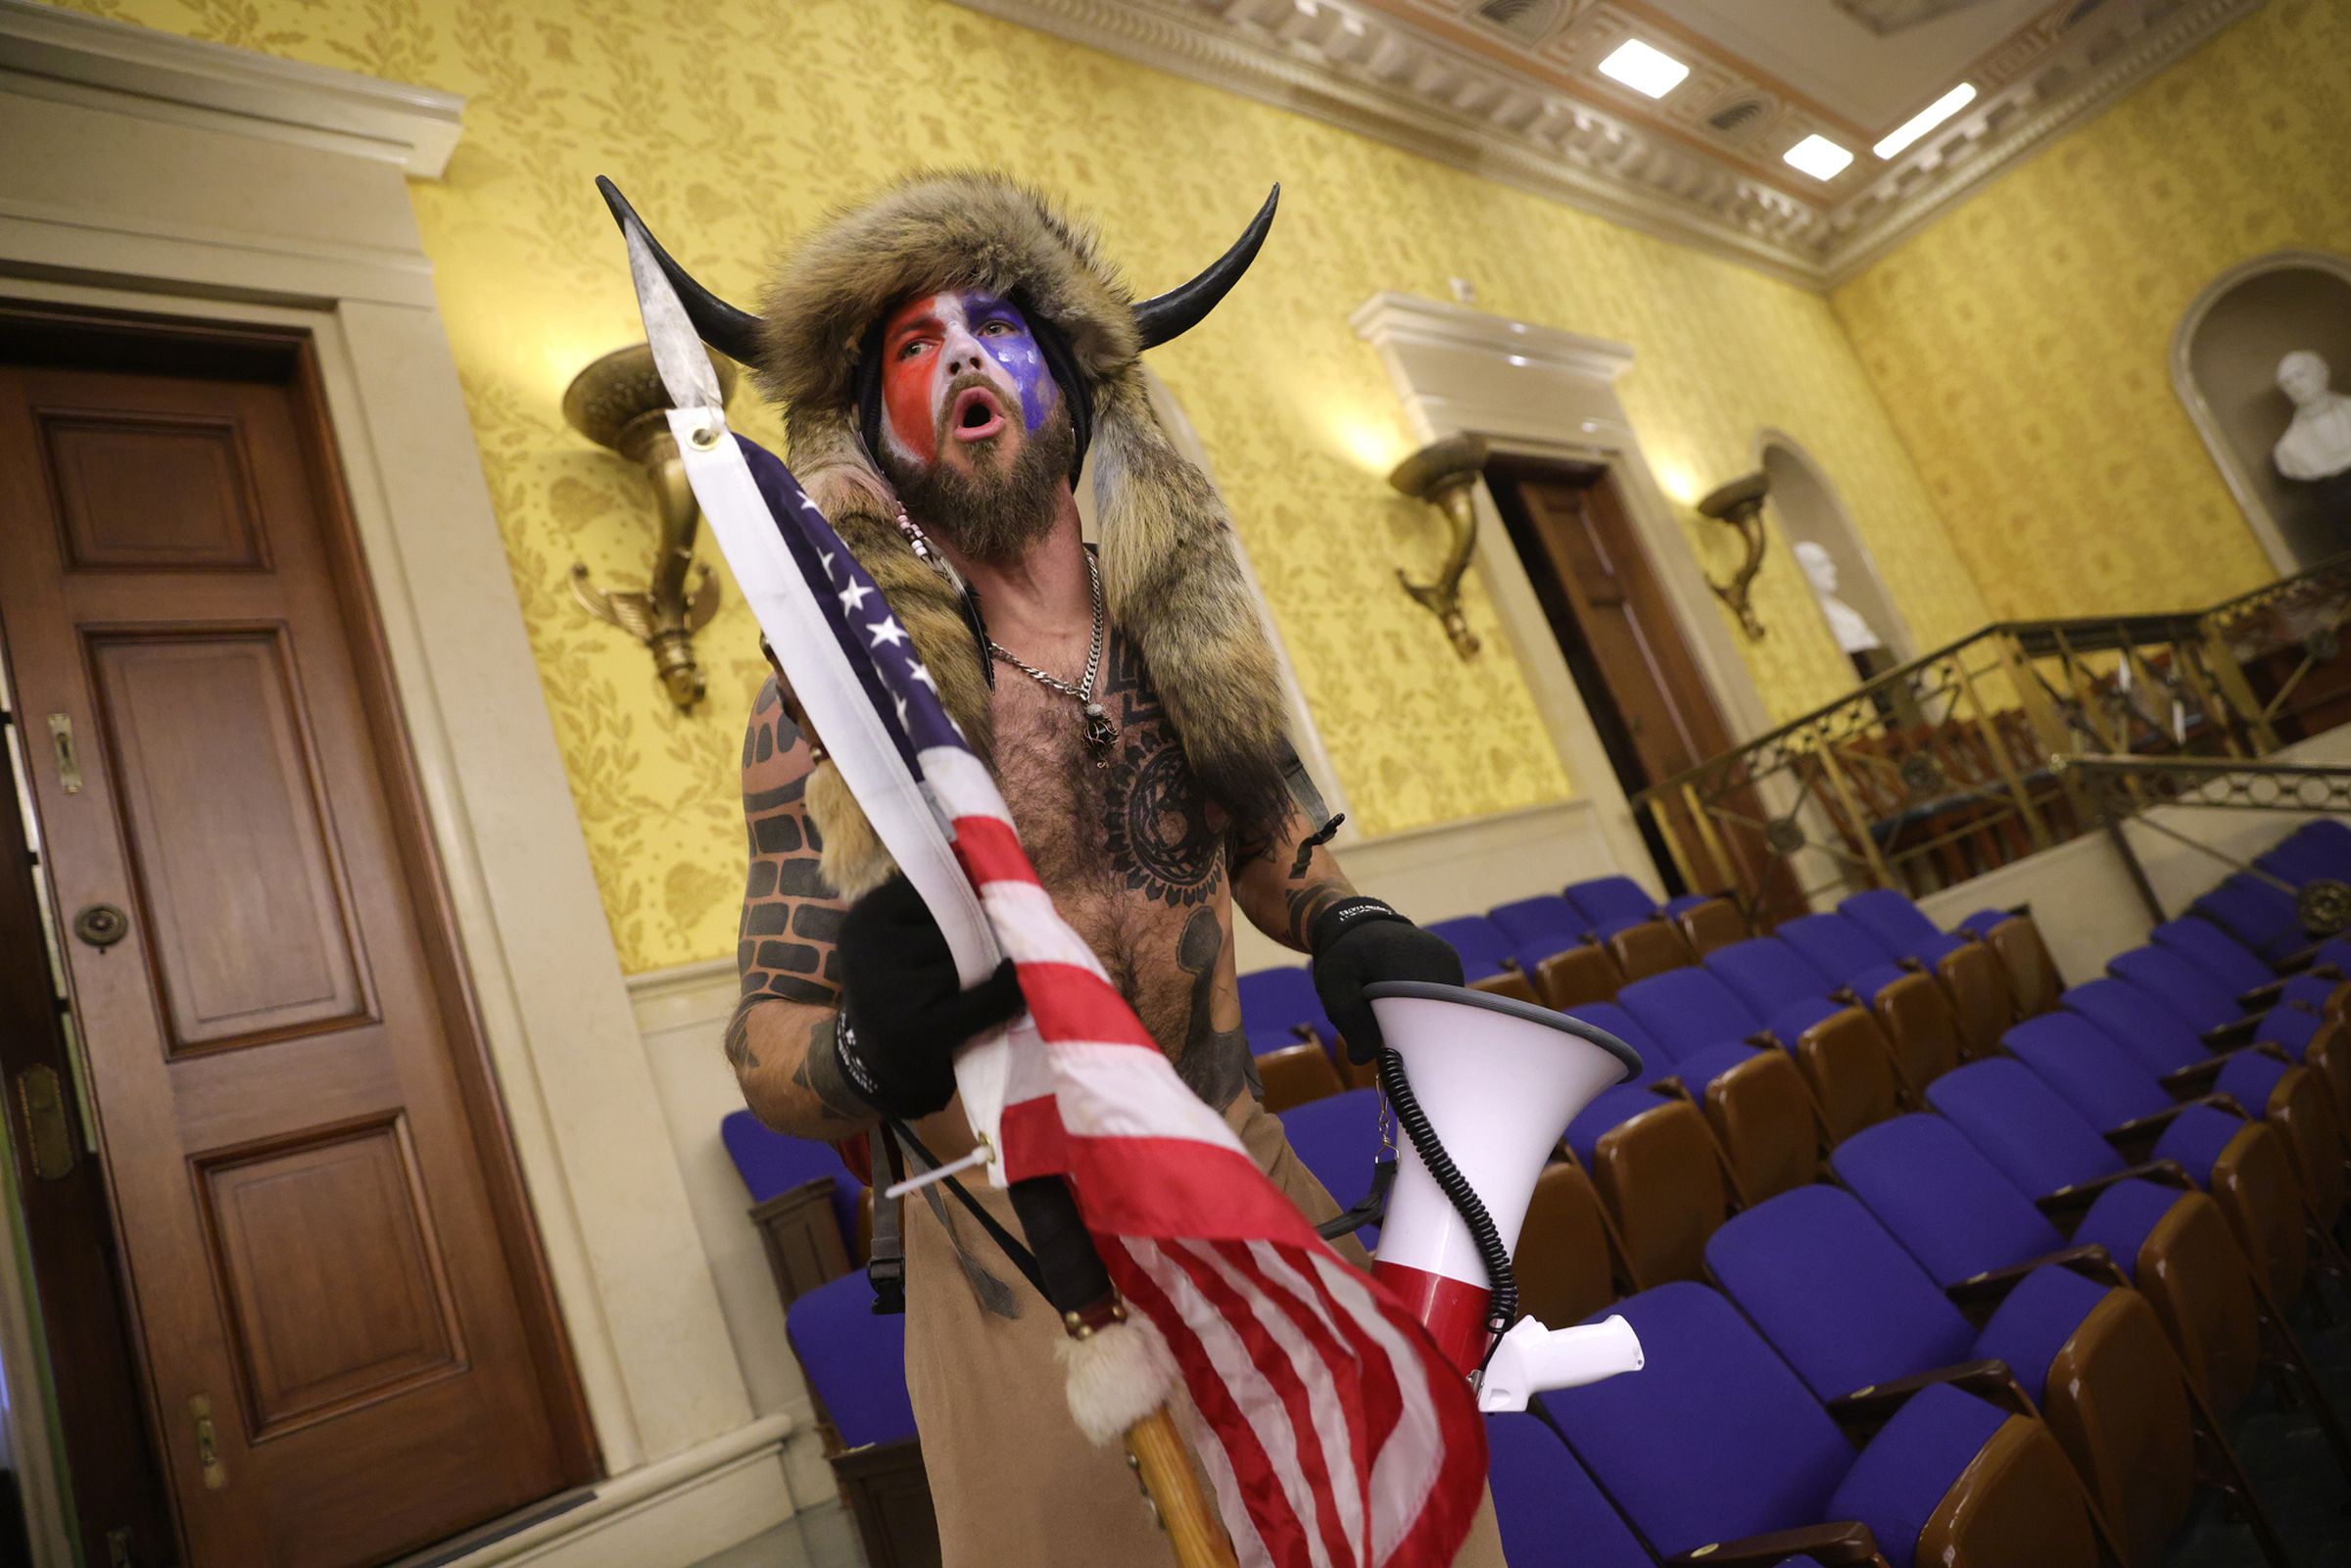 A protester screams “Freedom” inside the Senate Chamber after the US Capitol was breached by a mob during a joint session of Congress.